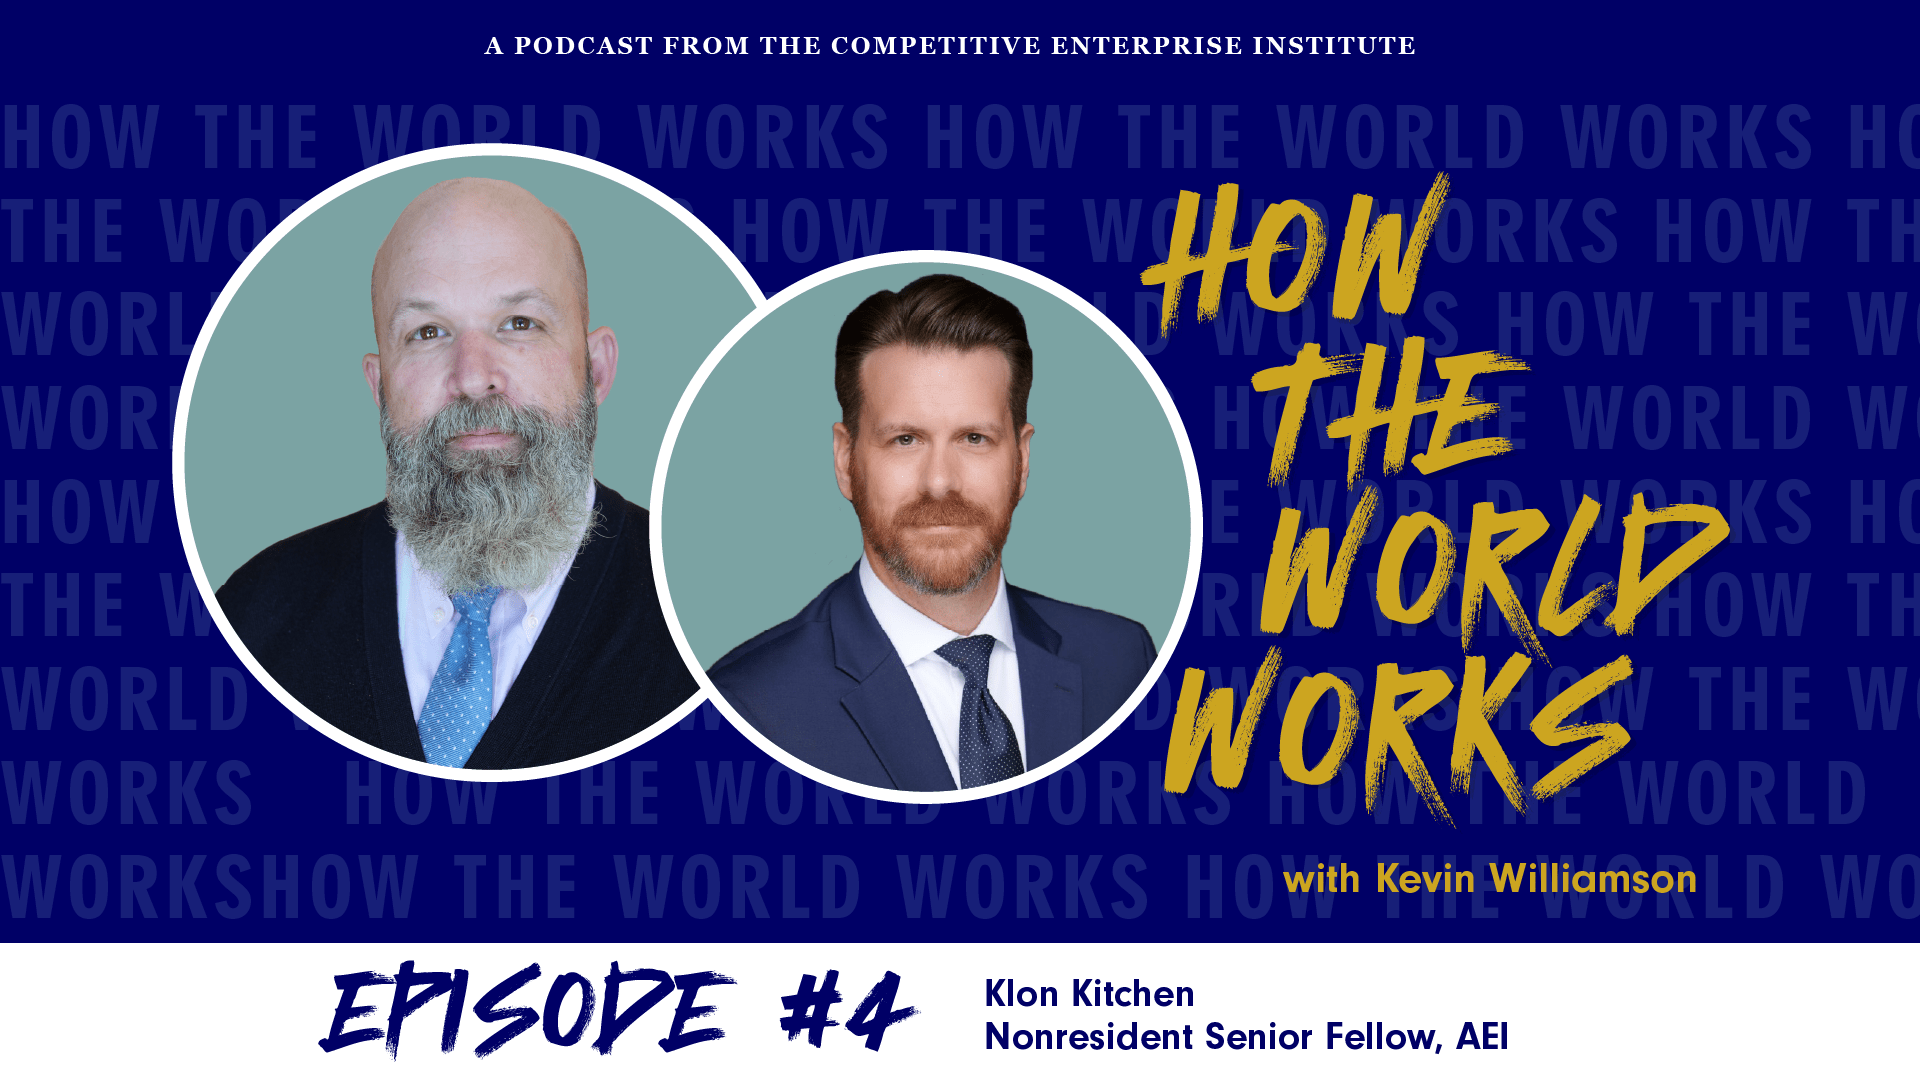 How the World Works Podcast with Guest Klon Kitchen